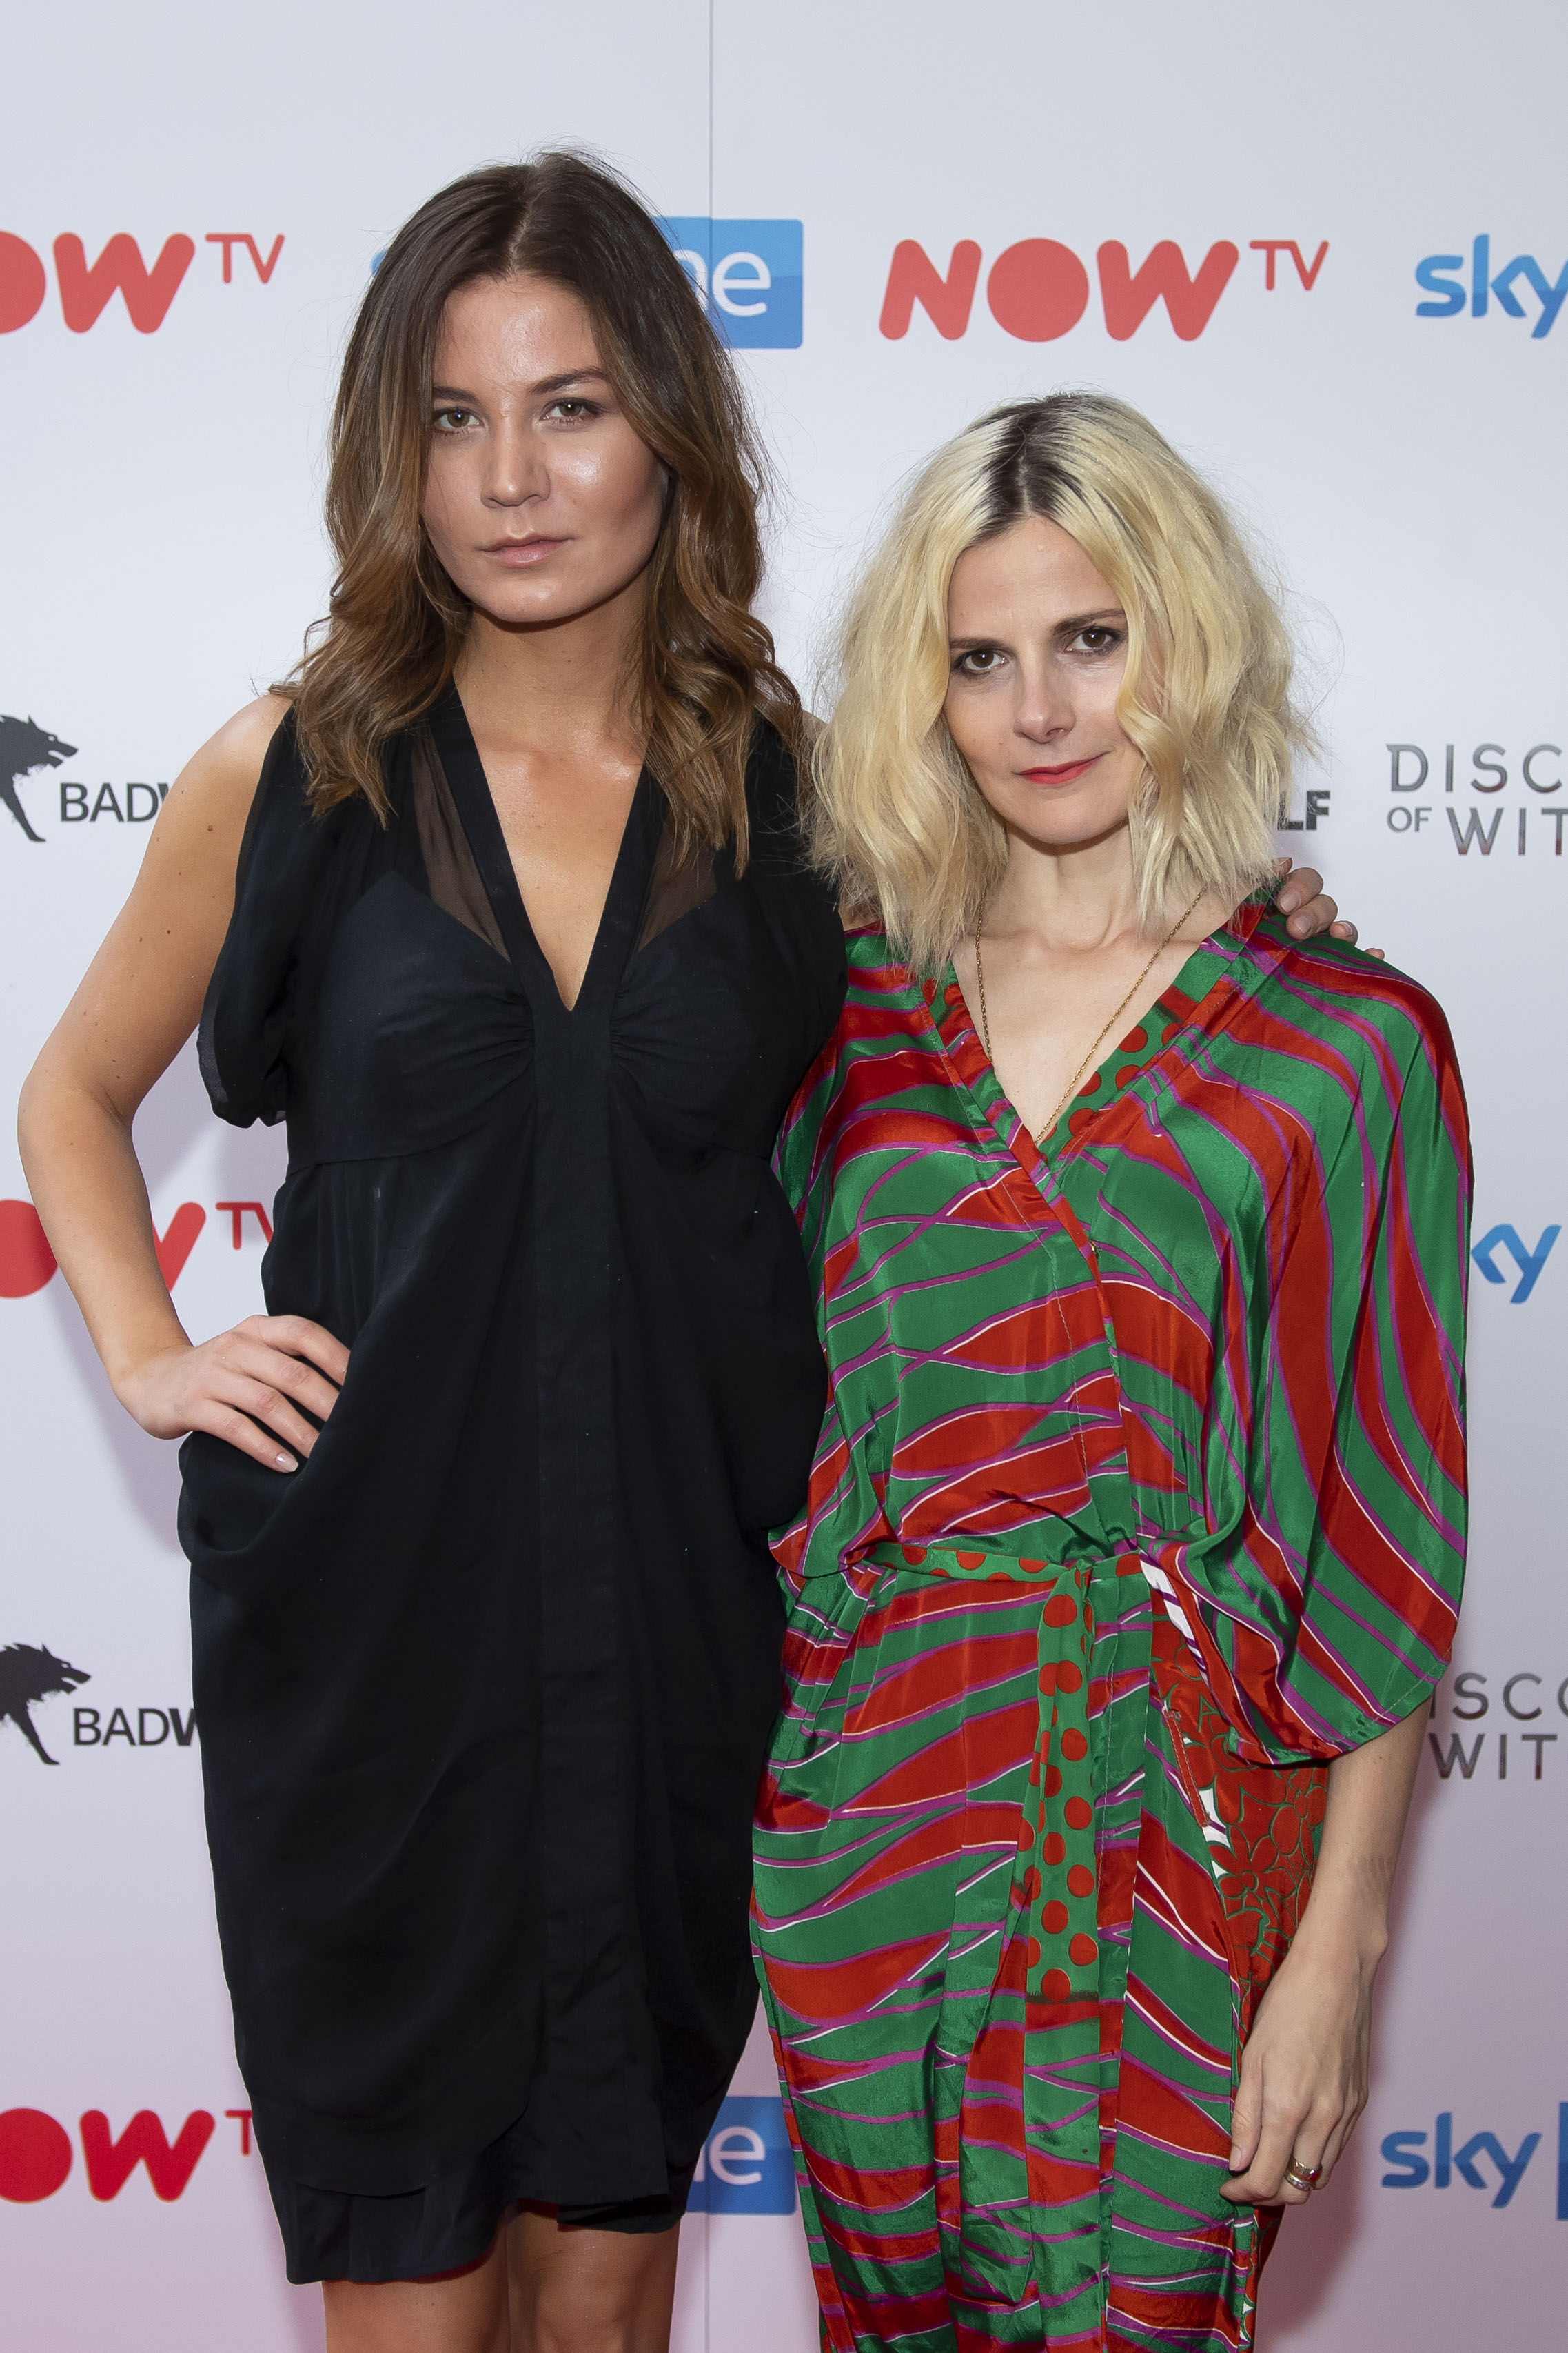  CARDIFF, WALES - SEPTEMBER 05: Malin Buska and Louise Brealey attend the UK Premiere of 'A Discovery Of Witches' at Cineworld on September 5, 2018 in Cardiff, Wales. (Photo by Matthew Horwood/Getty Images) 